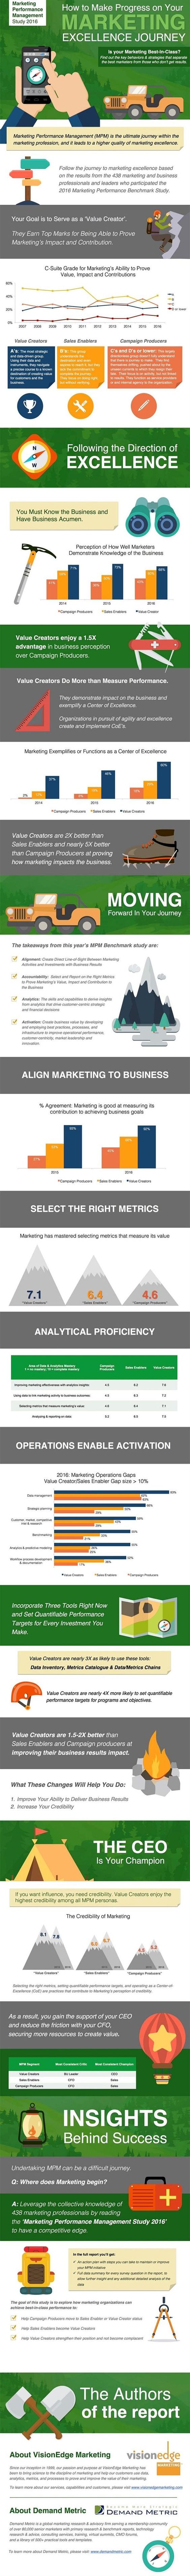 #Marketing #Infographic - How to Make Progress on Your Marketing Excellence Journey